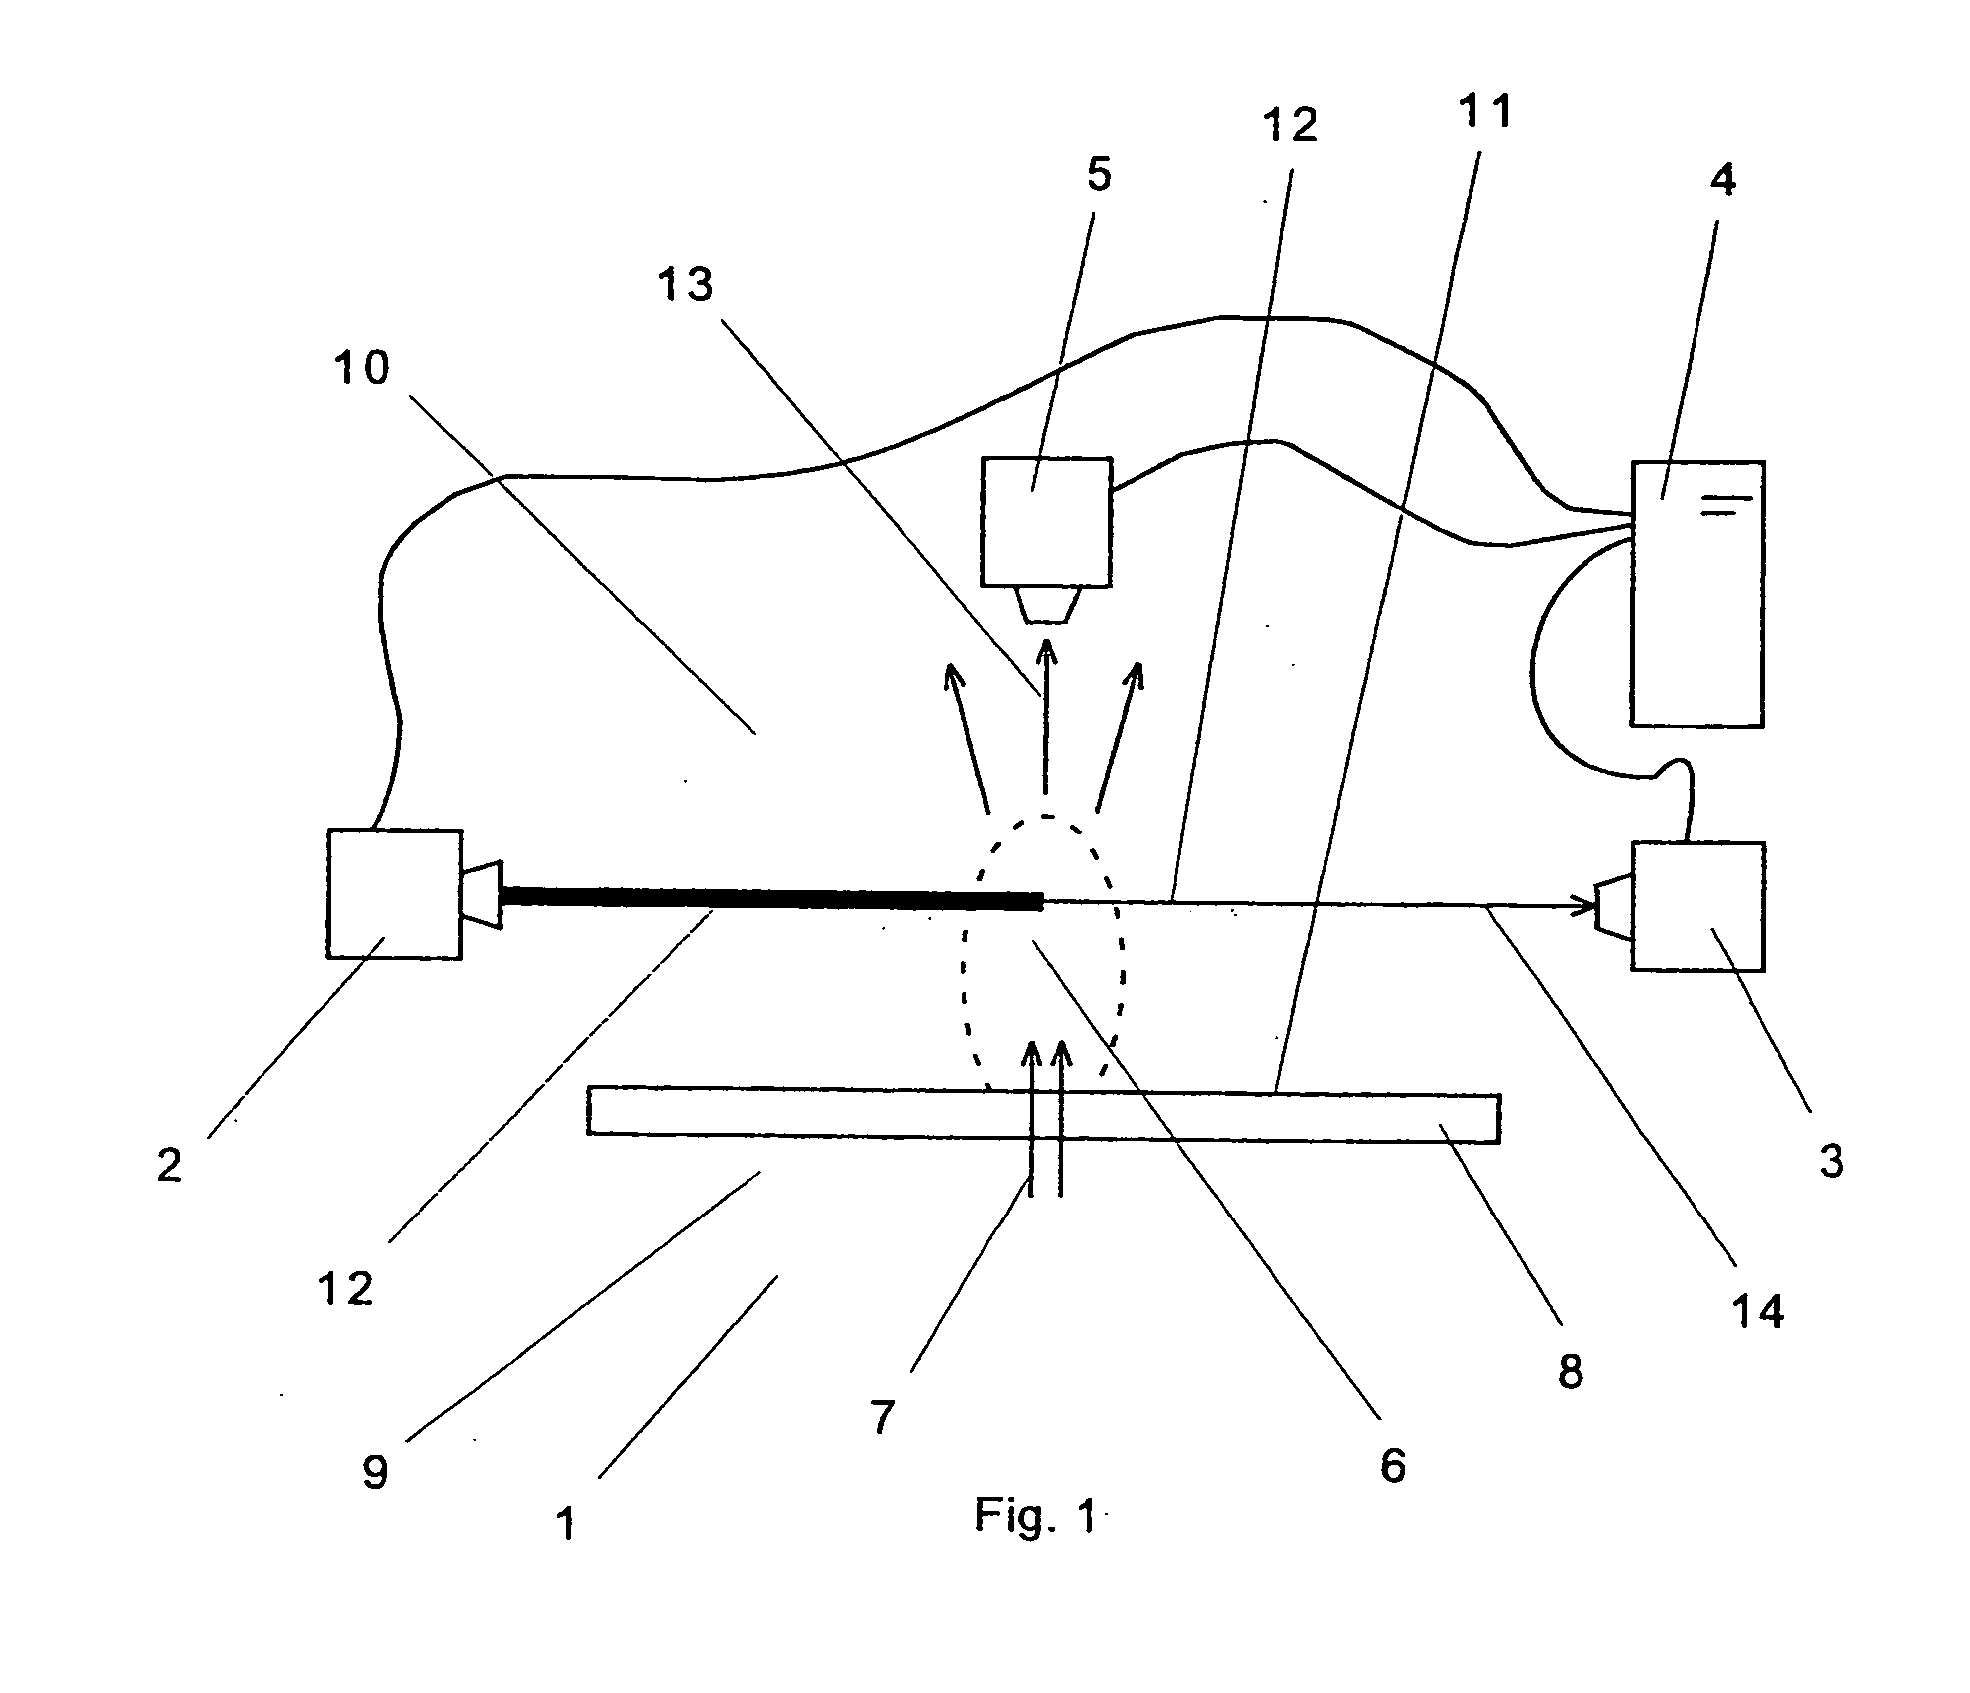 Test apparatus and method for examining sheet-like components for perforations